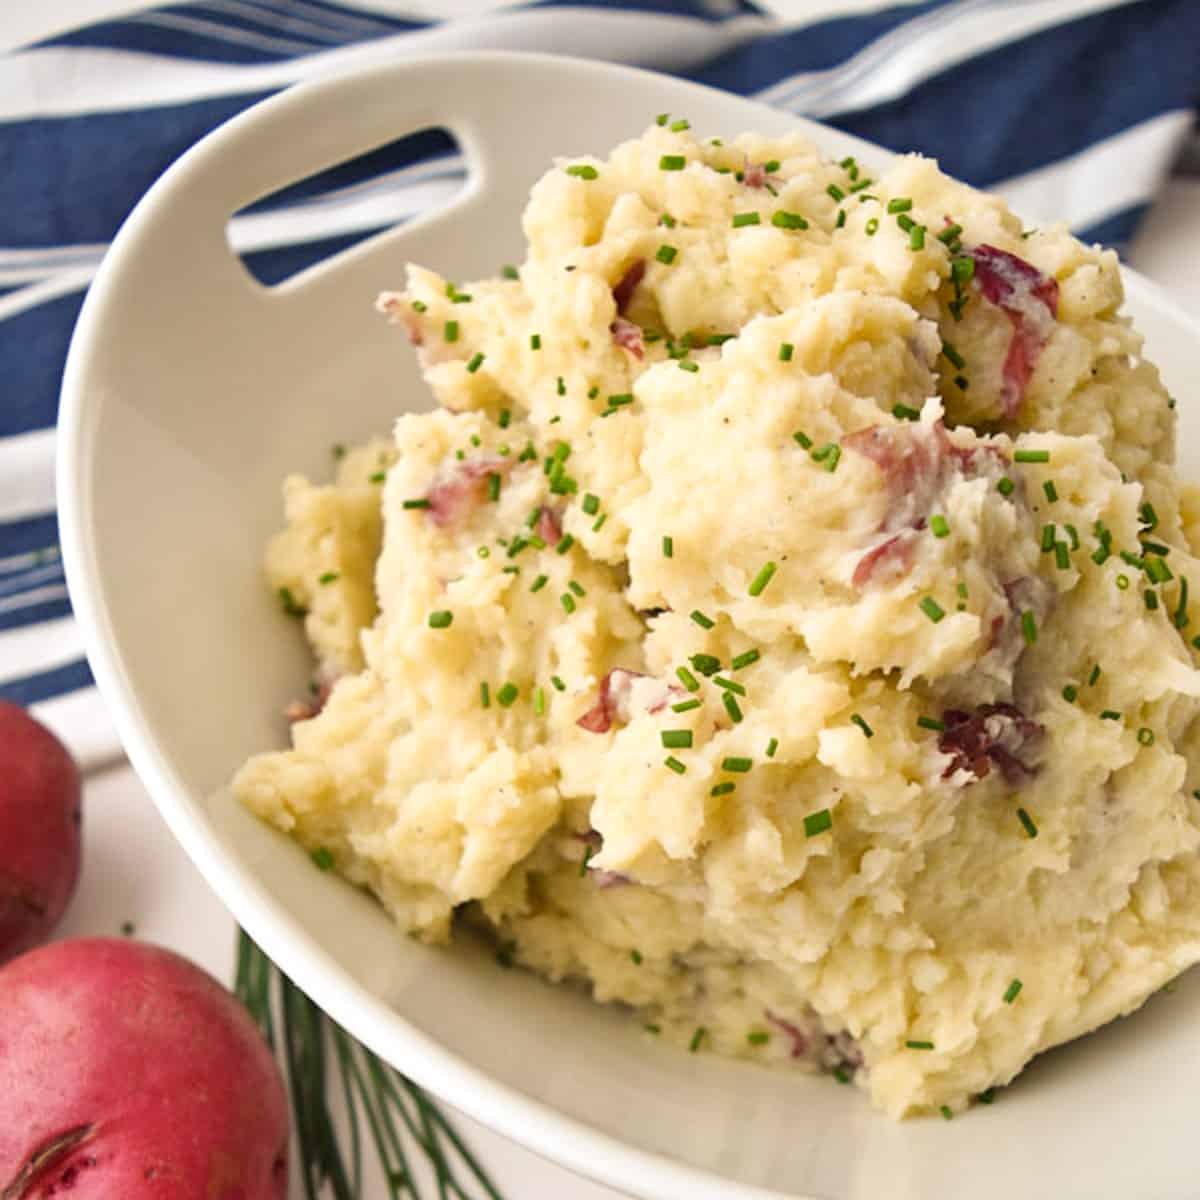 garlic mashed potatoes in a white bowl next to red potatoes and a blue and white towel